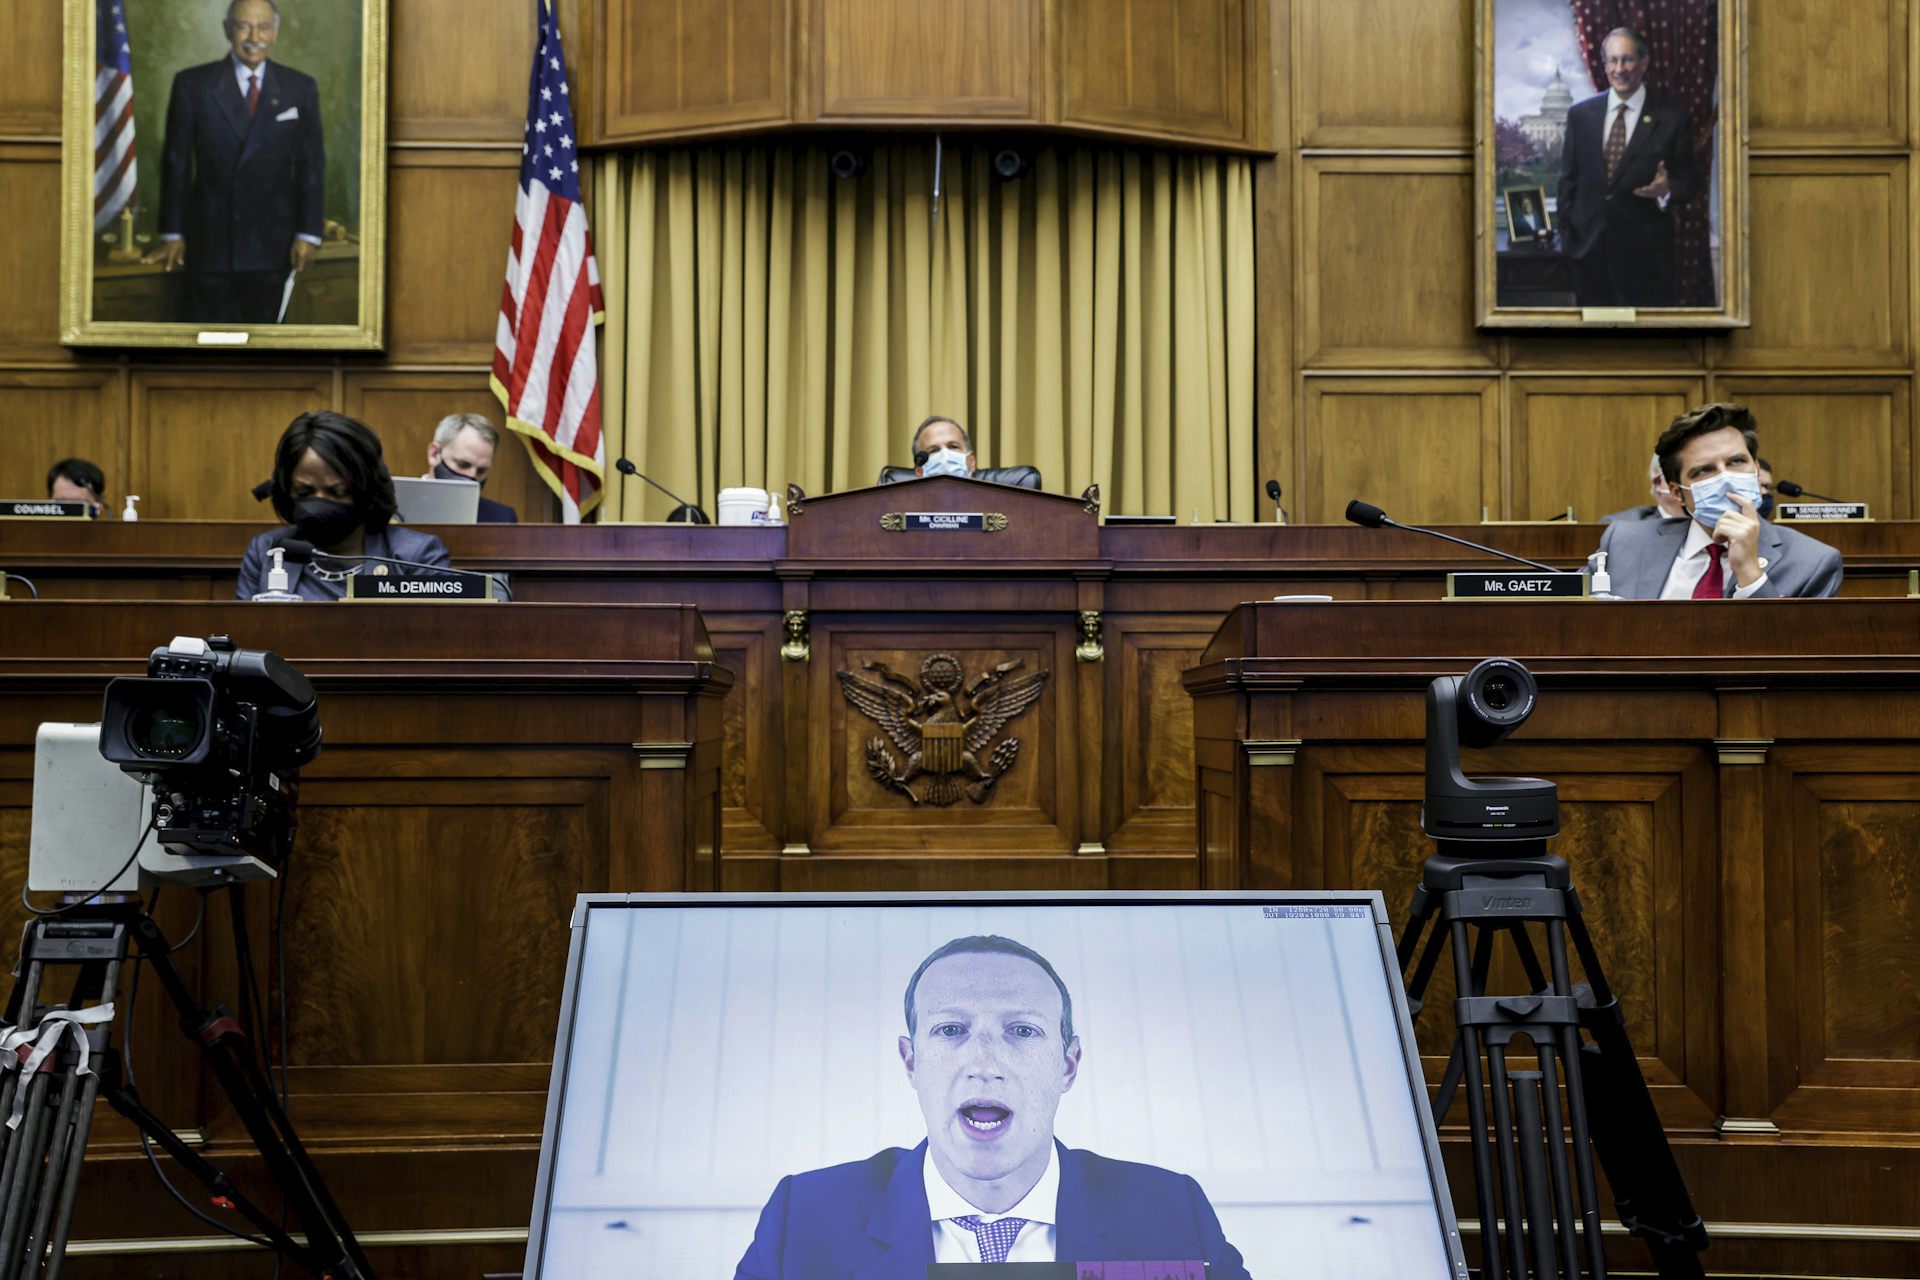 Facebook CEO Mark Zuckerberg speaks via video conference during a House Judiciary subcommittee hearing on antitrust in Washington on July 29, 2020.